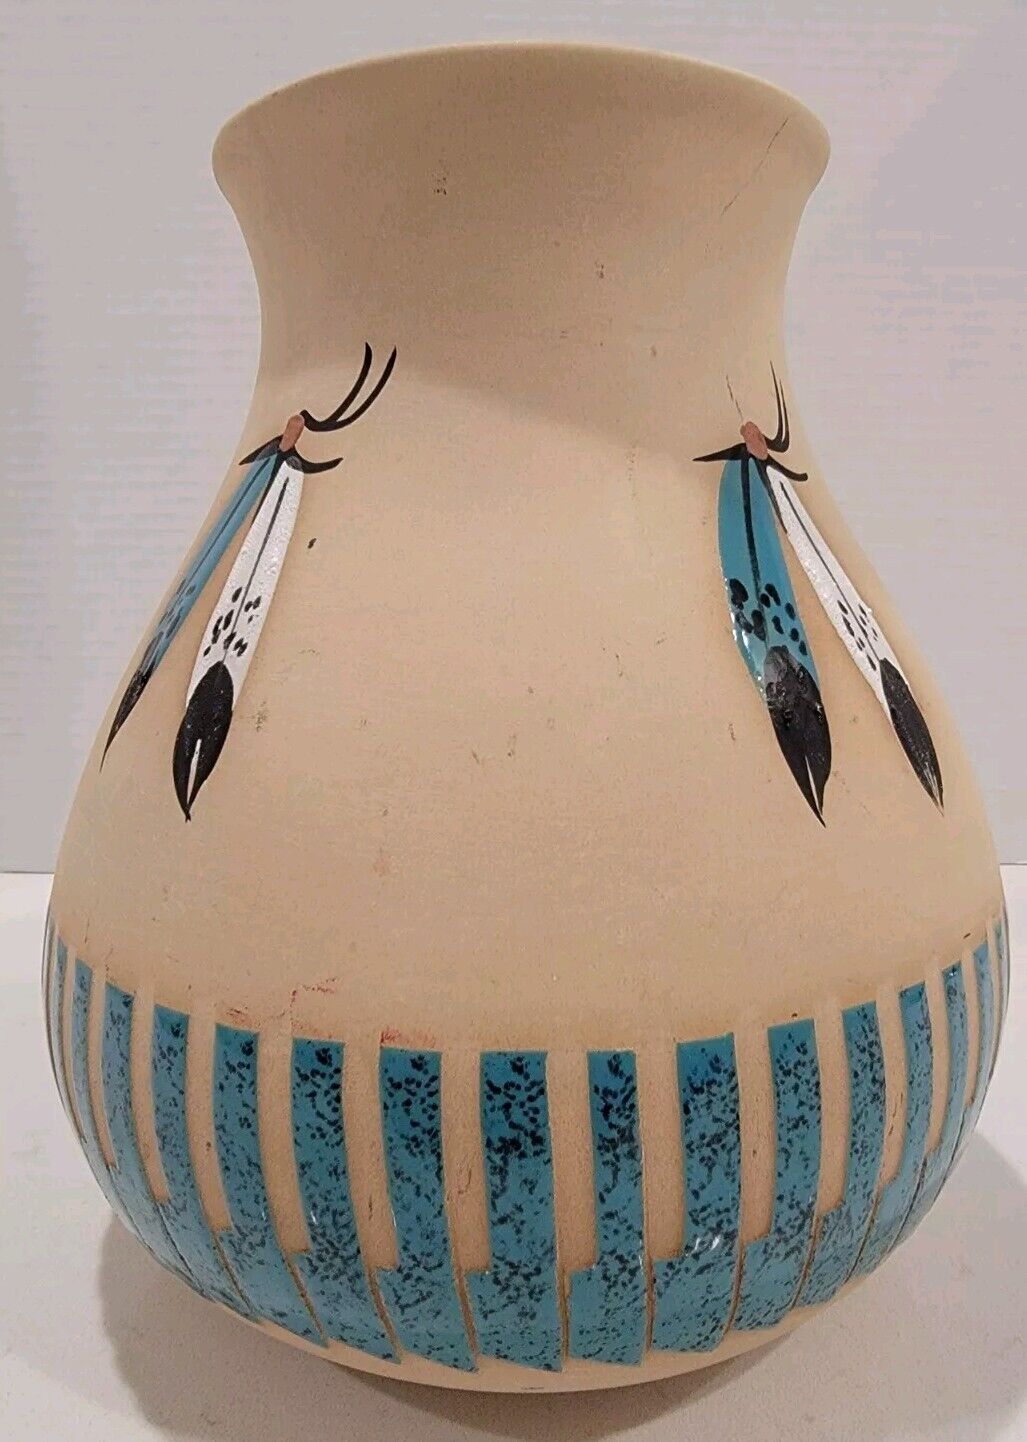 Vintage Marilyn Wiley Pottery Vase Turquoise Glaze Feathers Art 9 1/4 X 8 AS IS